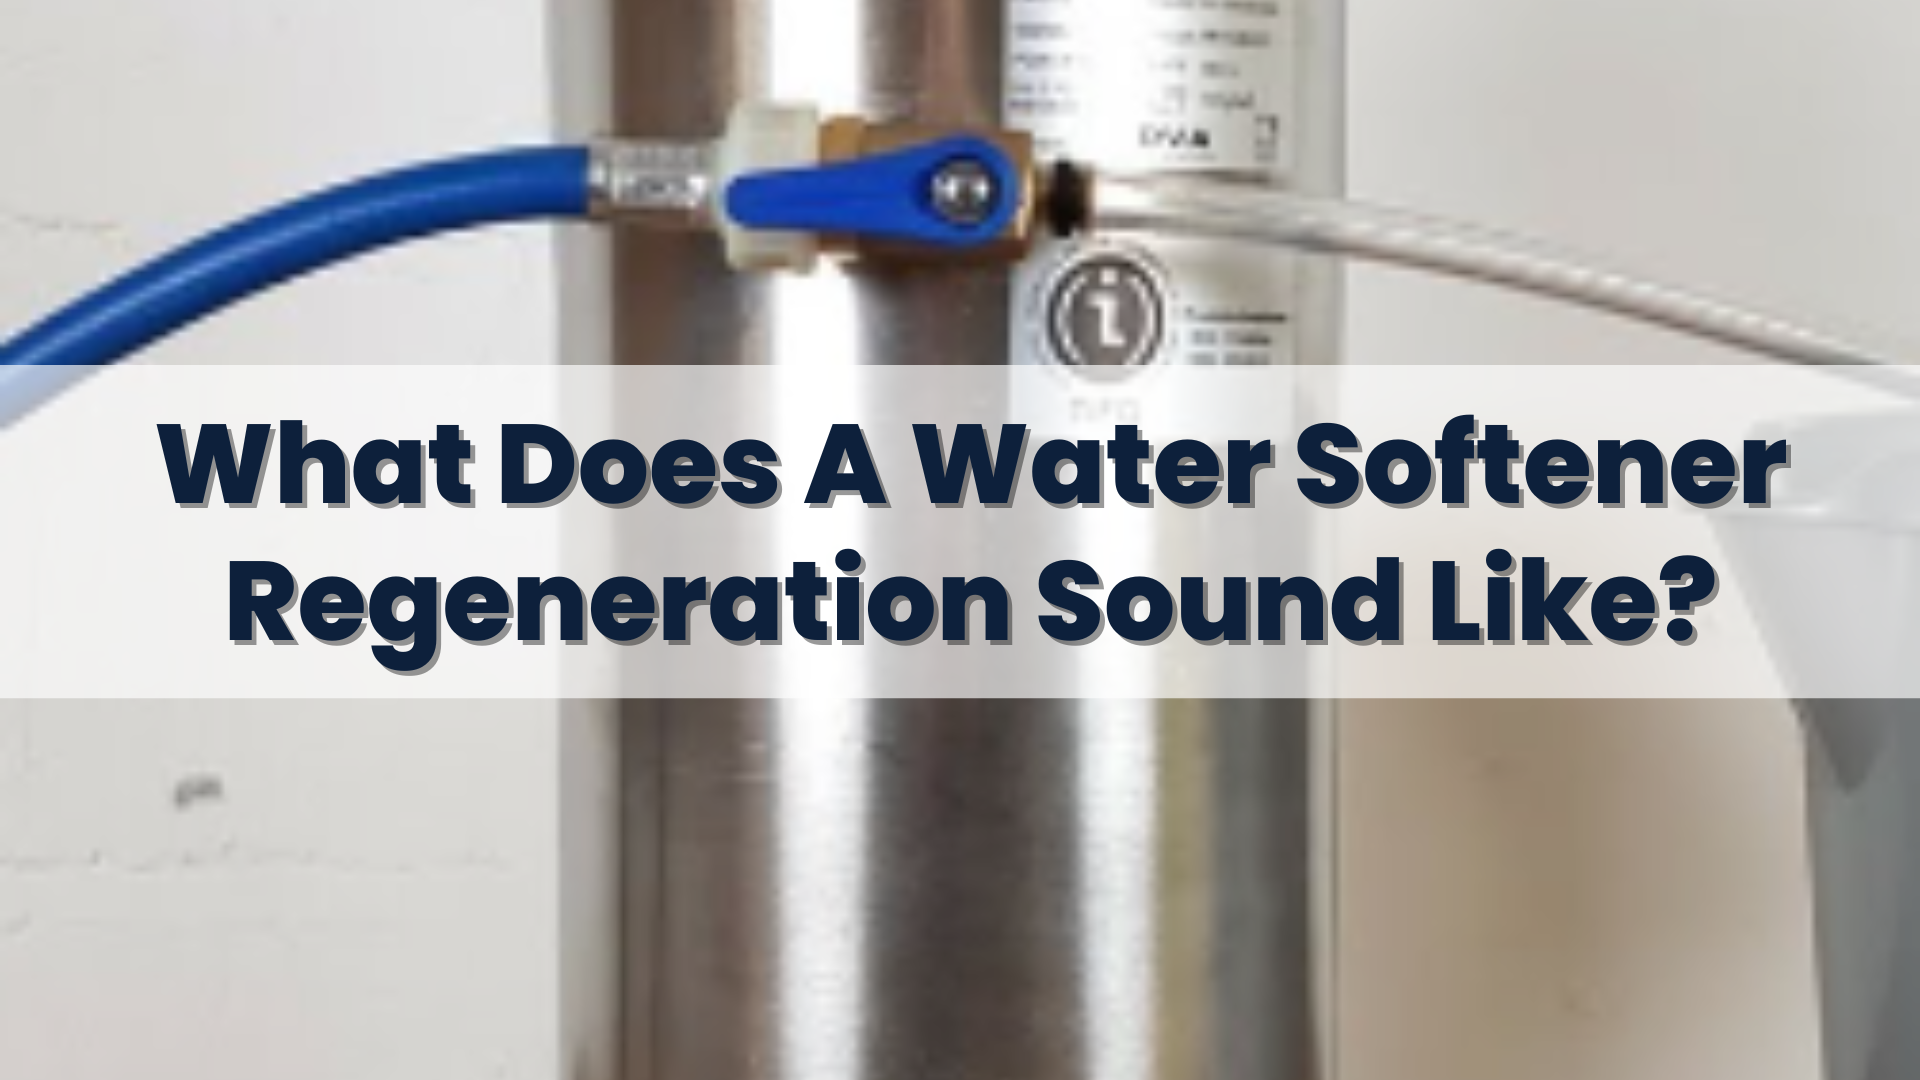 What Does A Water Softener Regeneration Sound Like